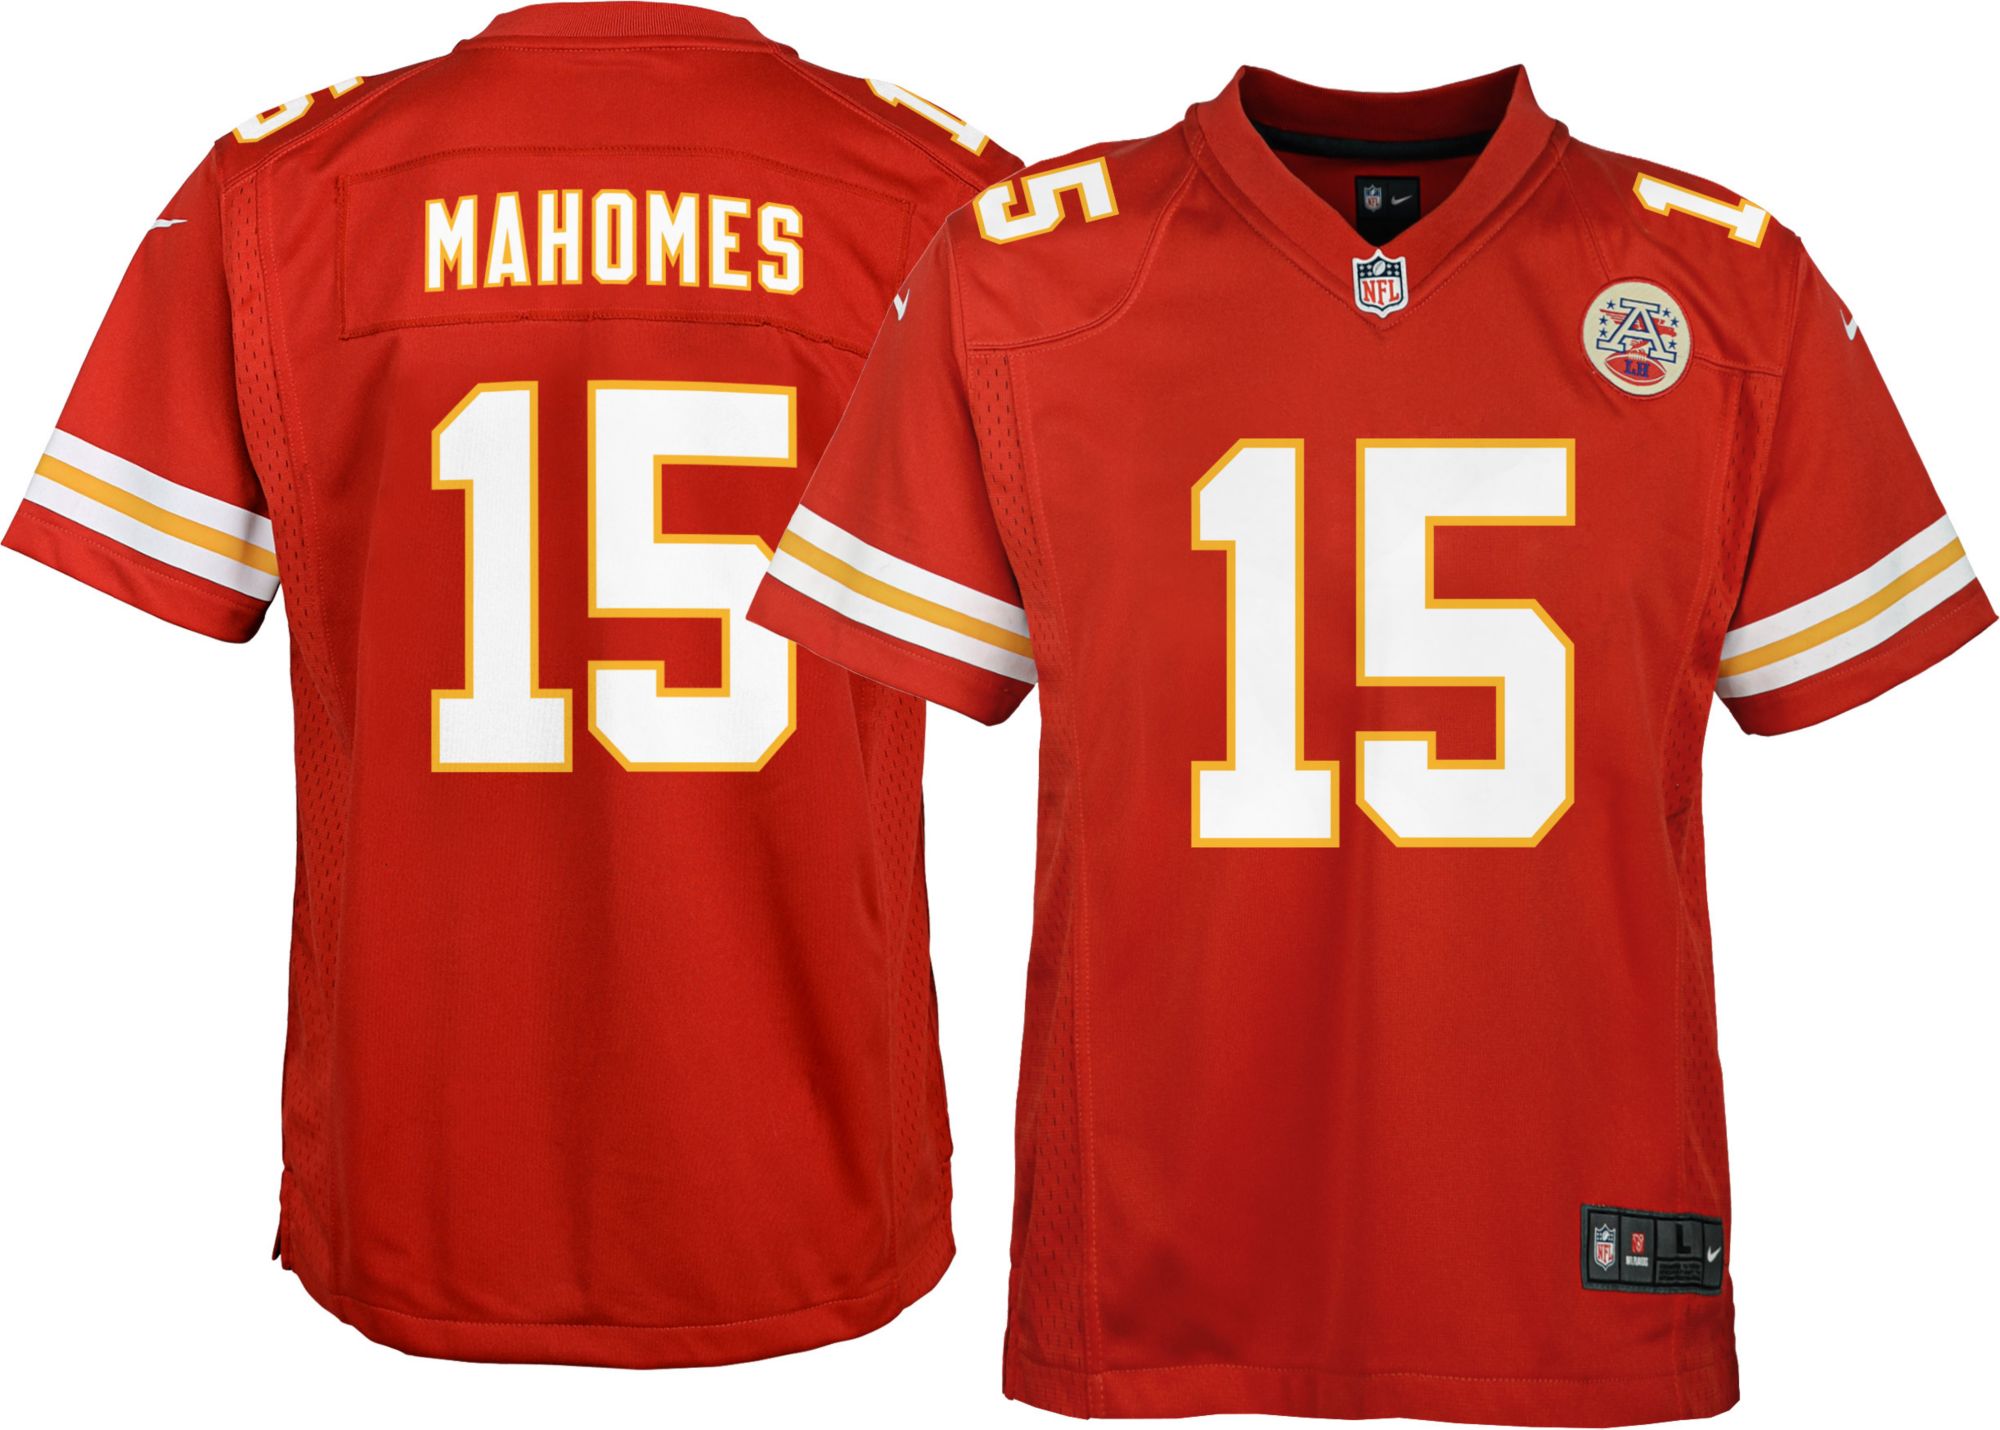 official mahomes jersey